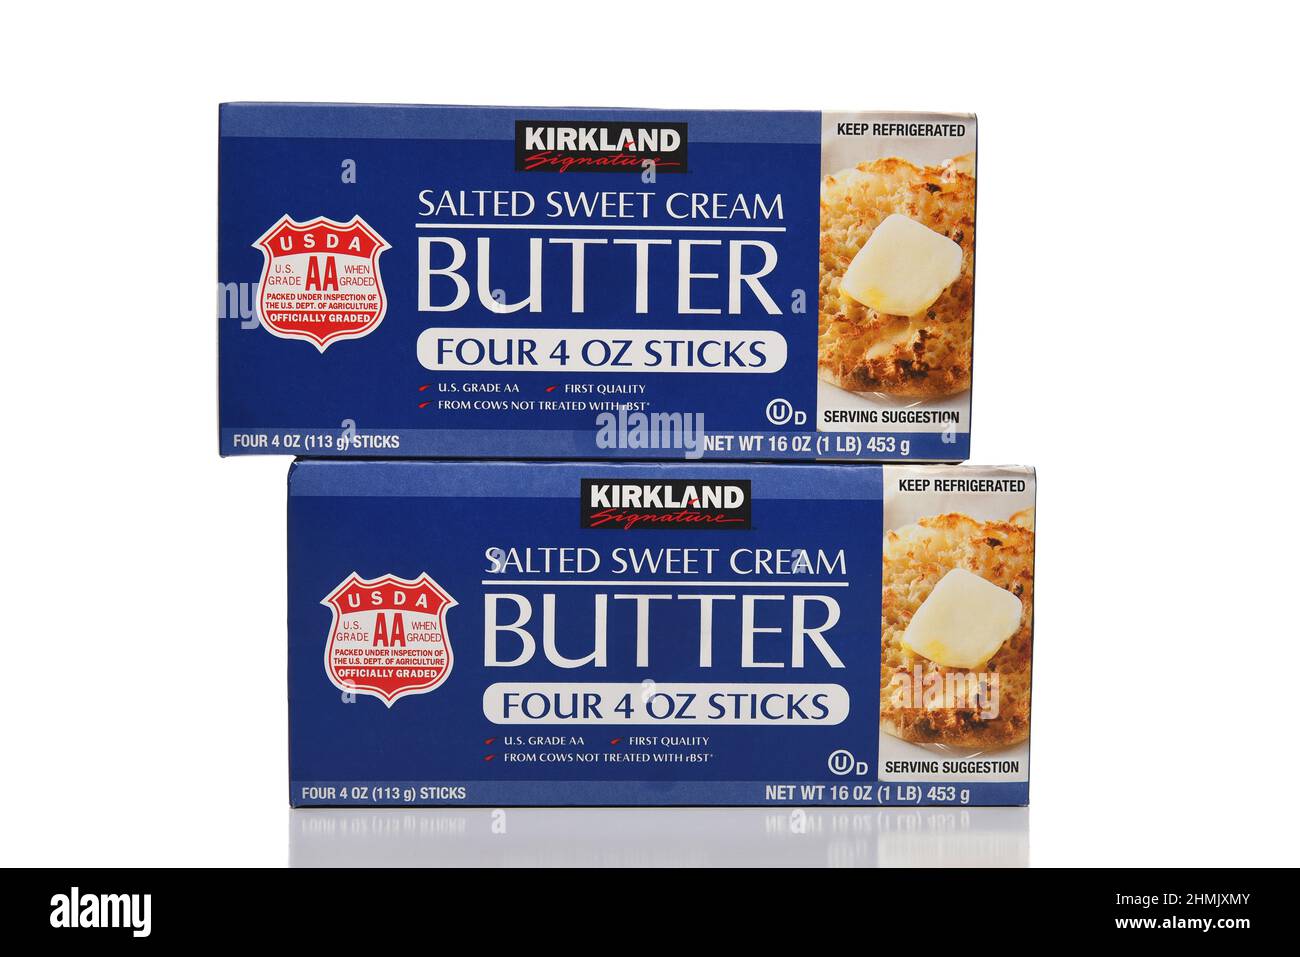 IRVINE, CALIFORNIA - 10 FEB 2022: Two packages of Kirkland Signature Salted Sweet Cream Butter, a private label of Costco Wholesale. Stock Photo